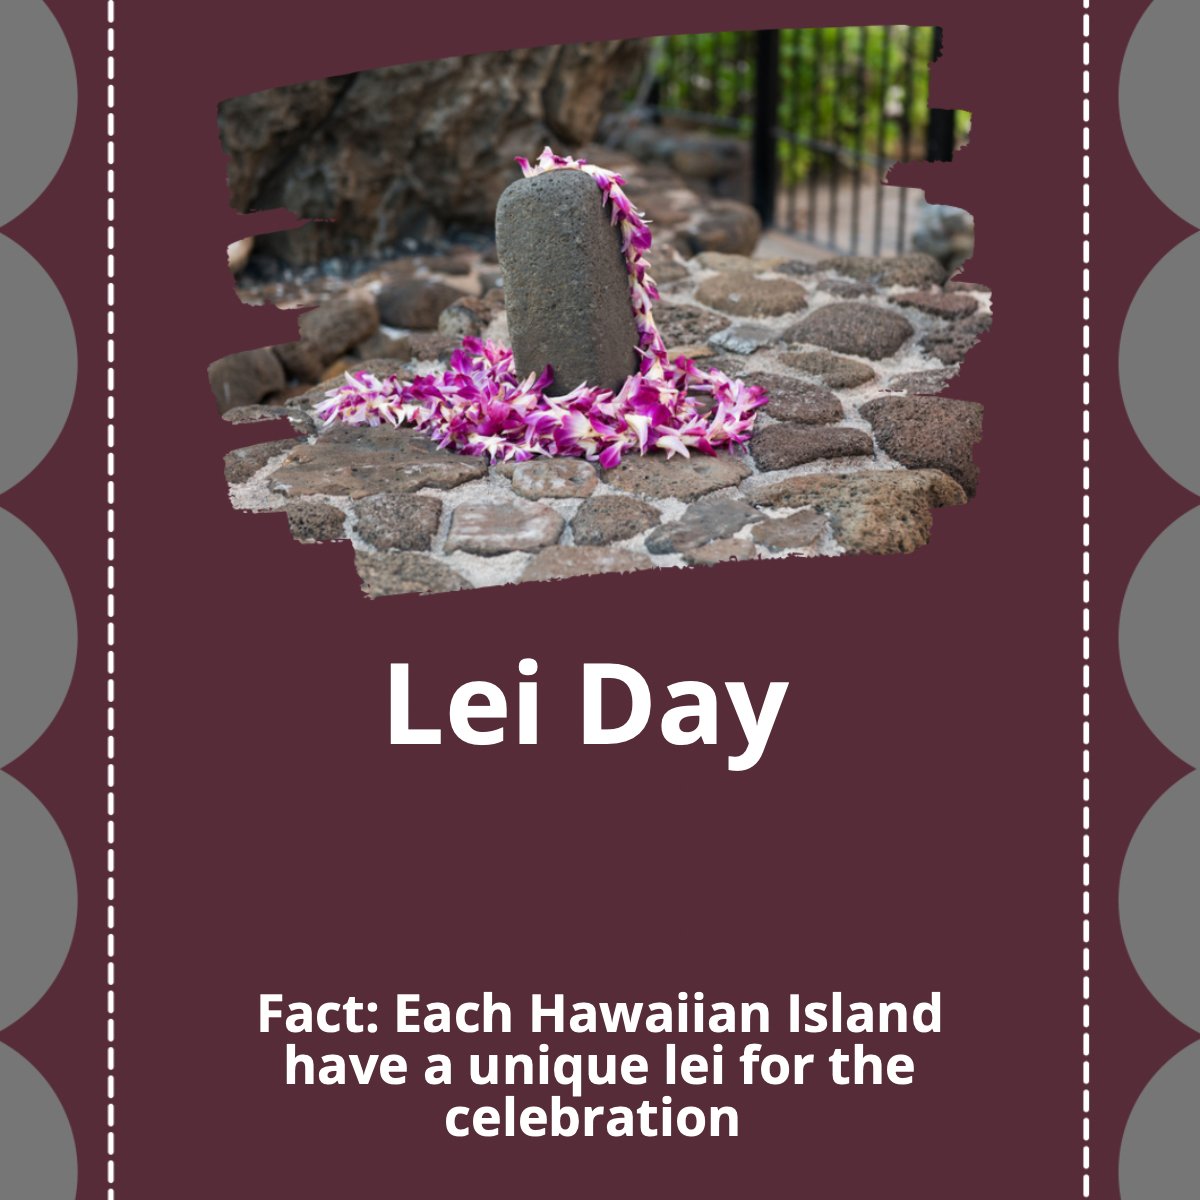 Happy Lei Day to all who celebrate 🙌!

Did you know? 🤔  Each Hawaiian island has a unique lei for the celebration. 😱

#lei #day #hawaii #flowers #celebration #grey
 #whoyouworkwithmatters